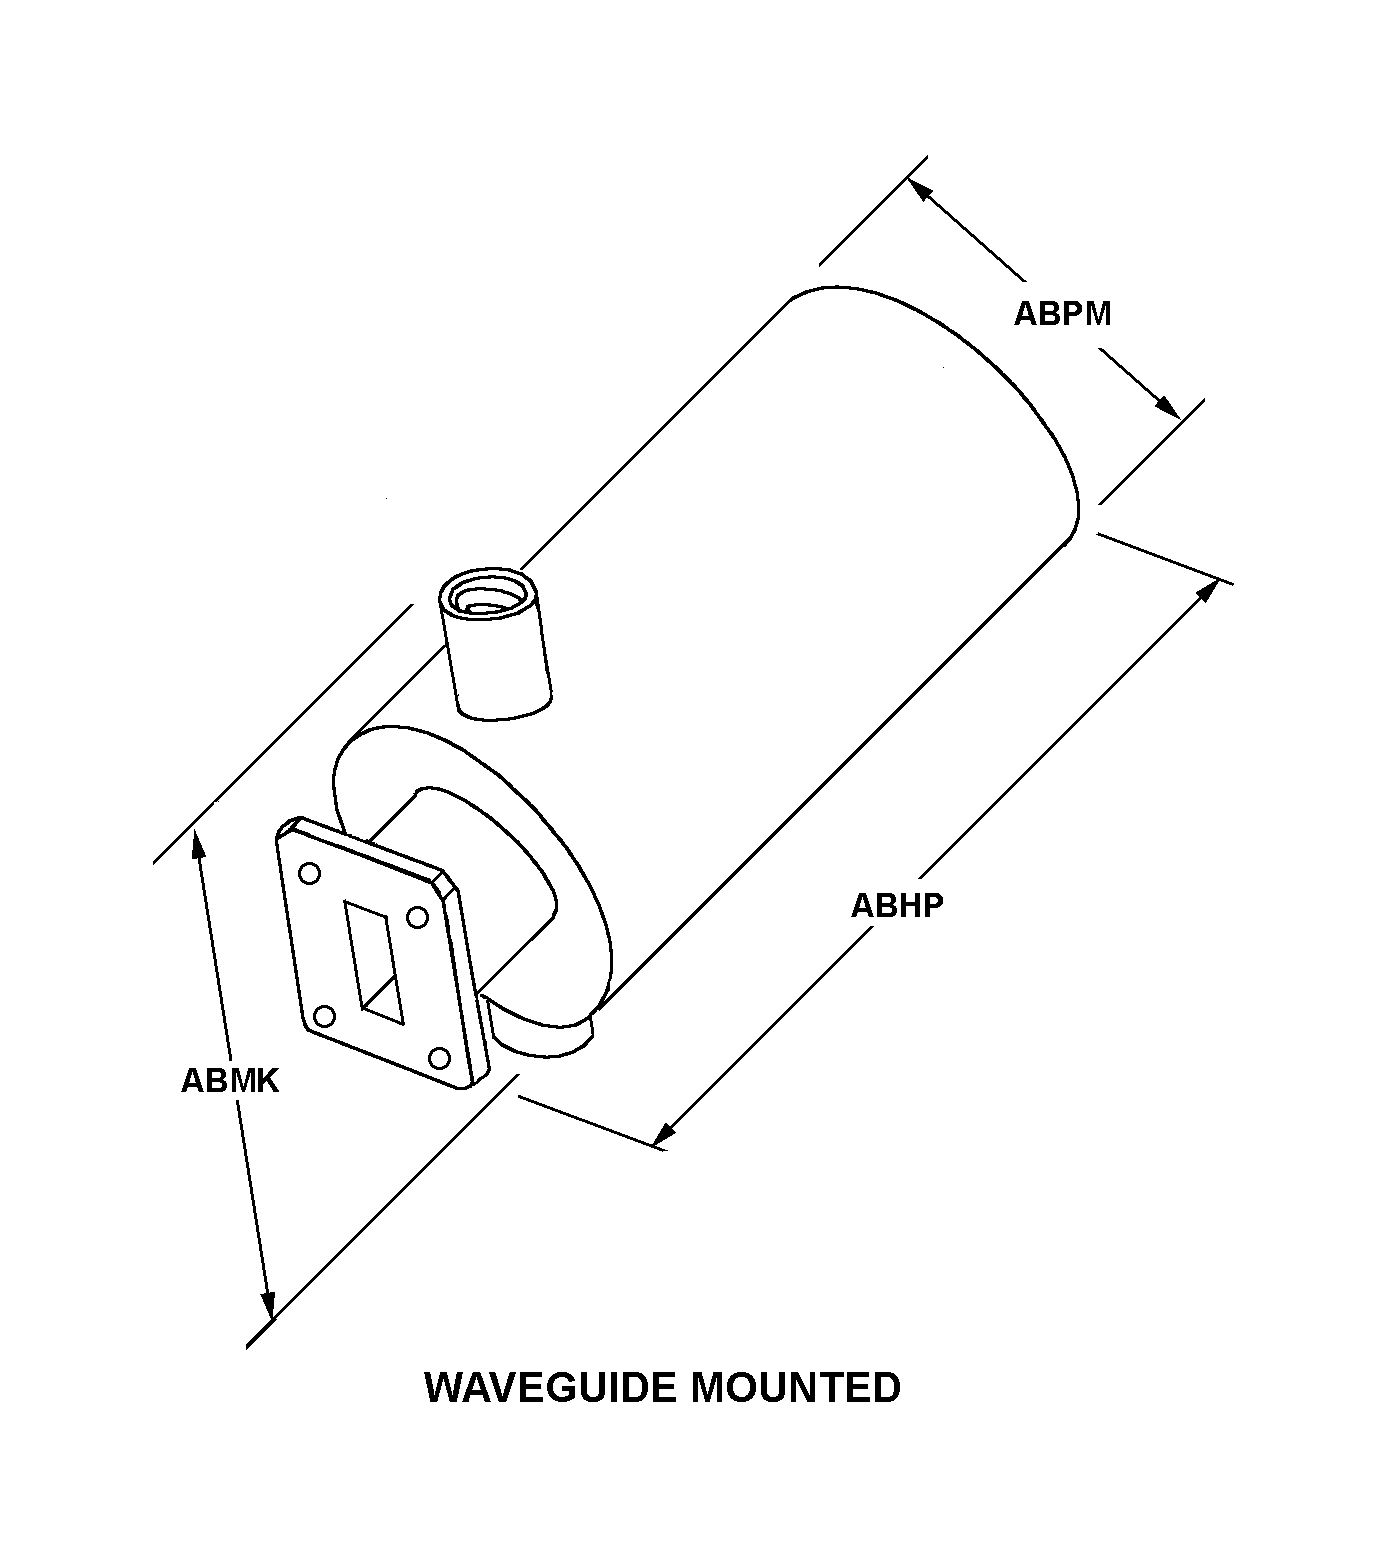 WAVEGUIDE MOUNTED style nsn 5985-01-239-5982